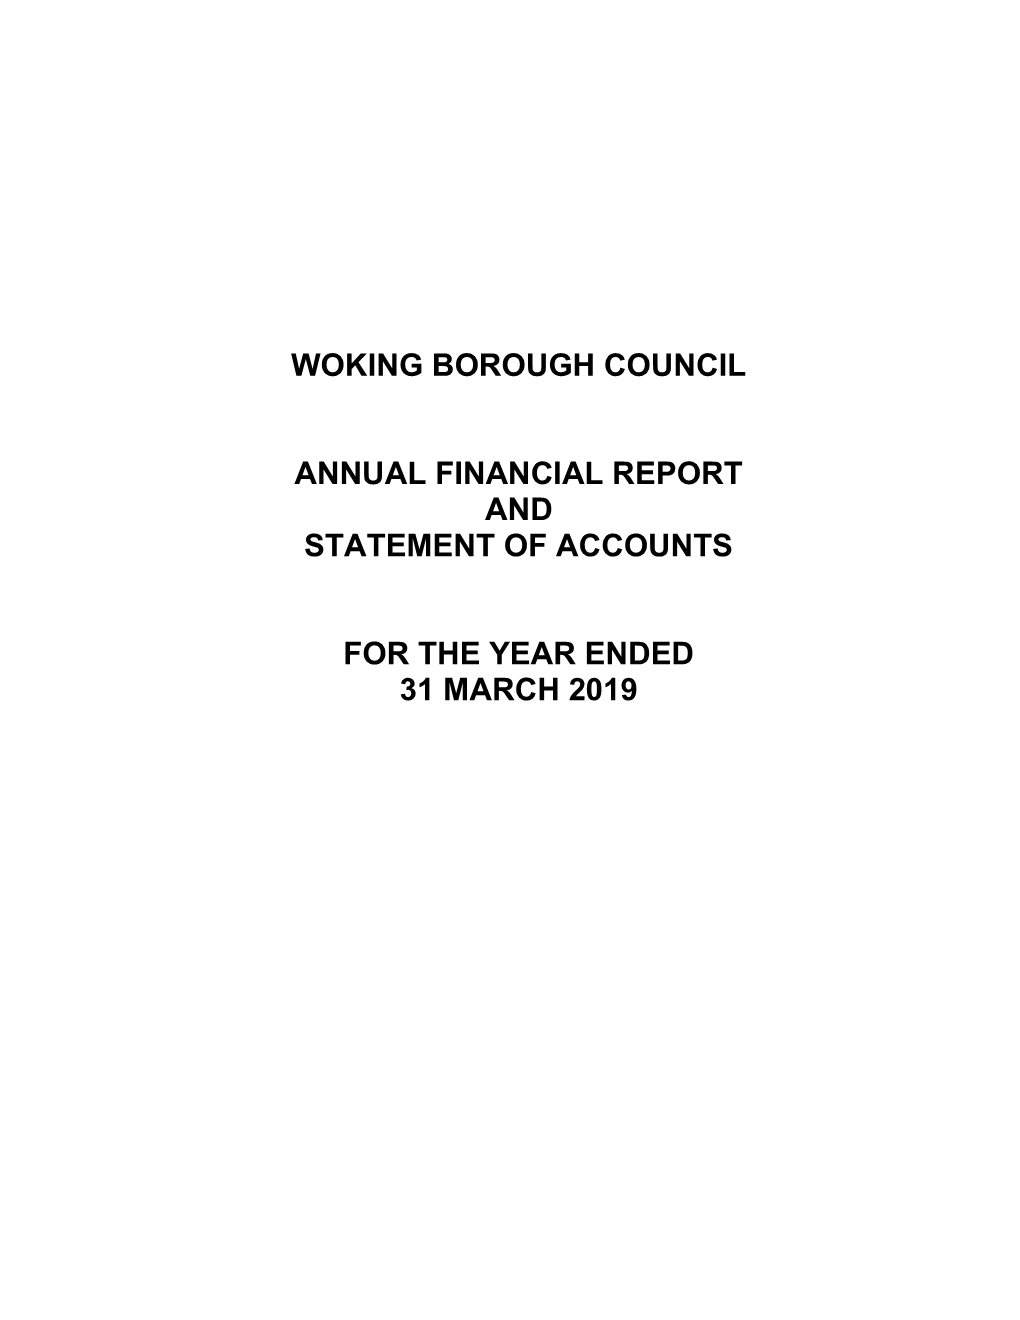 Woking Borough Council Annual Financial Report and Statement Of